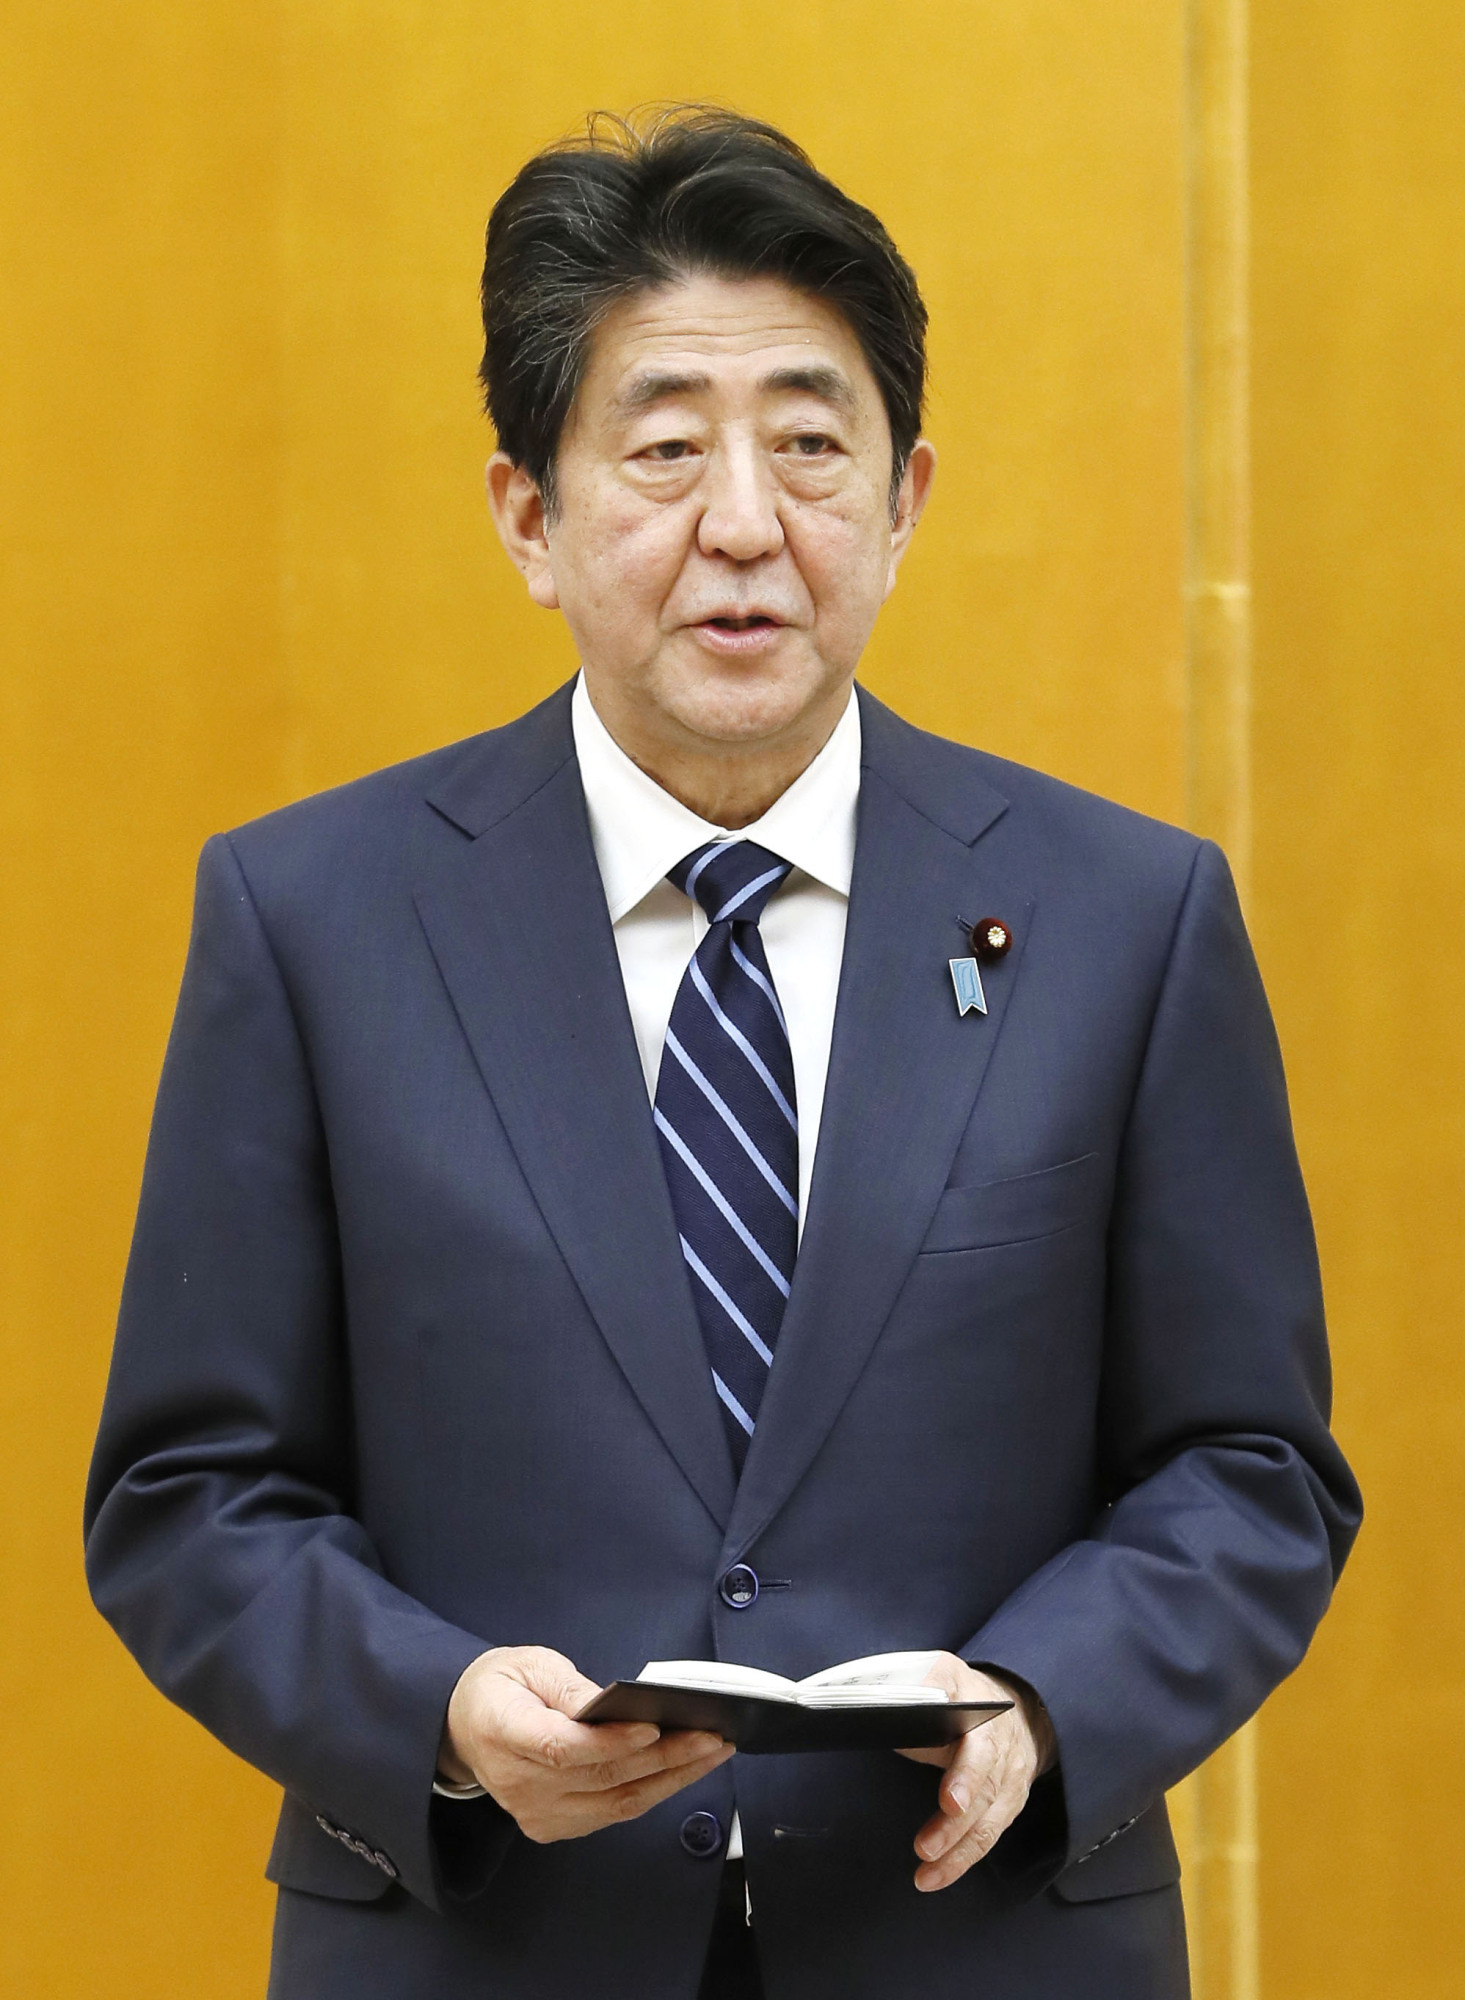 Prime Minister Shinzo Abe mention about US-North Korea Summit Meeting in his New Year’s Reflection